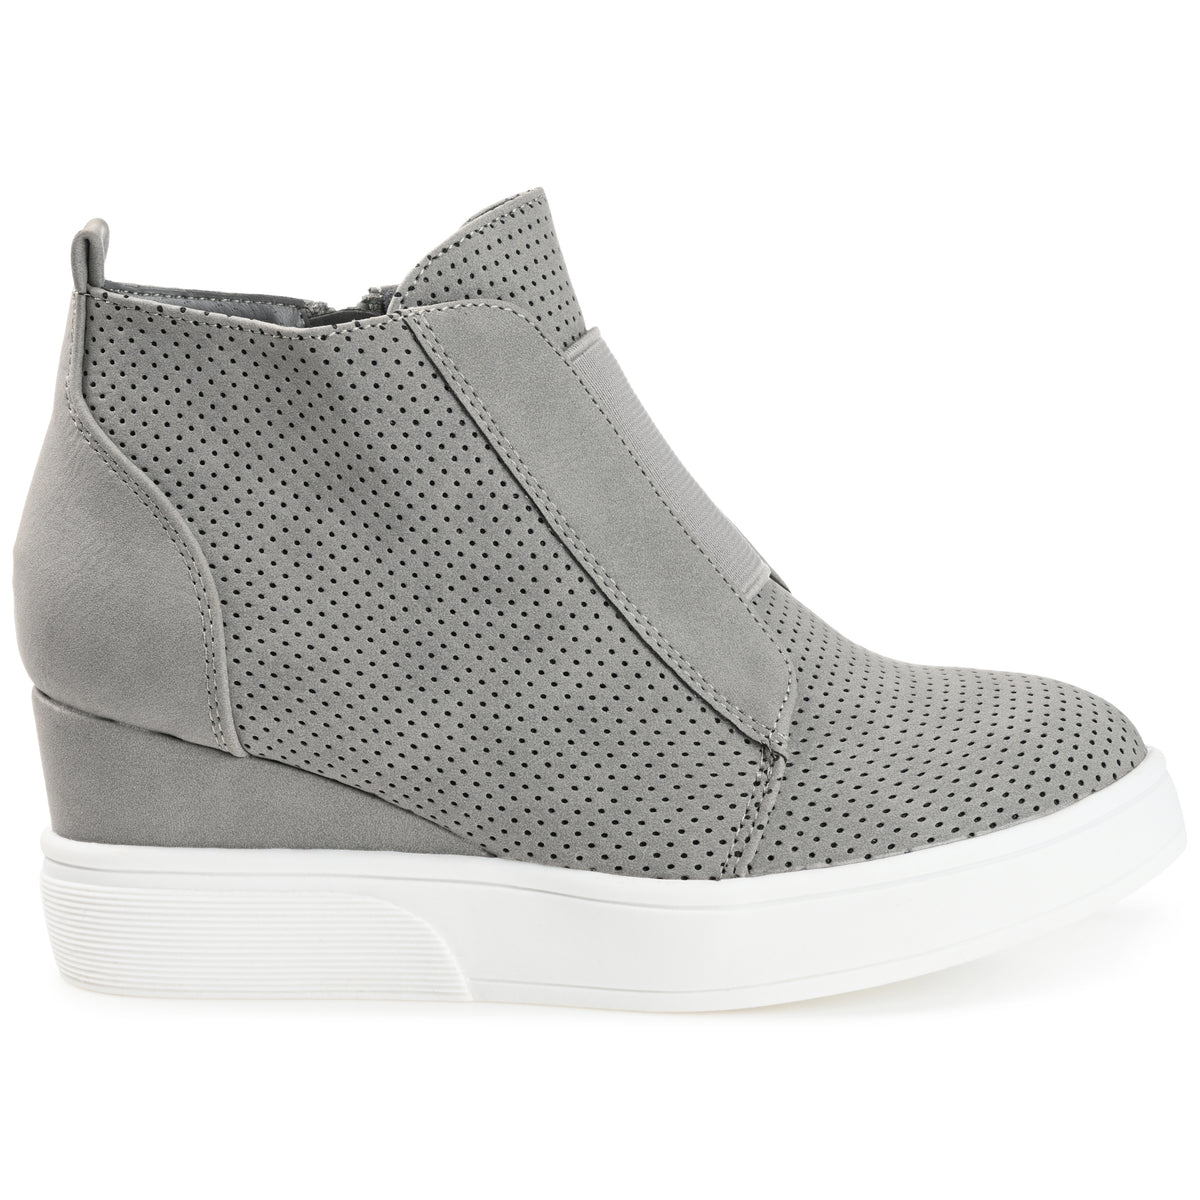 Clara Wedge Sneaker | Women's Wedged Shoes | Journee Collection